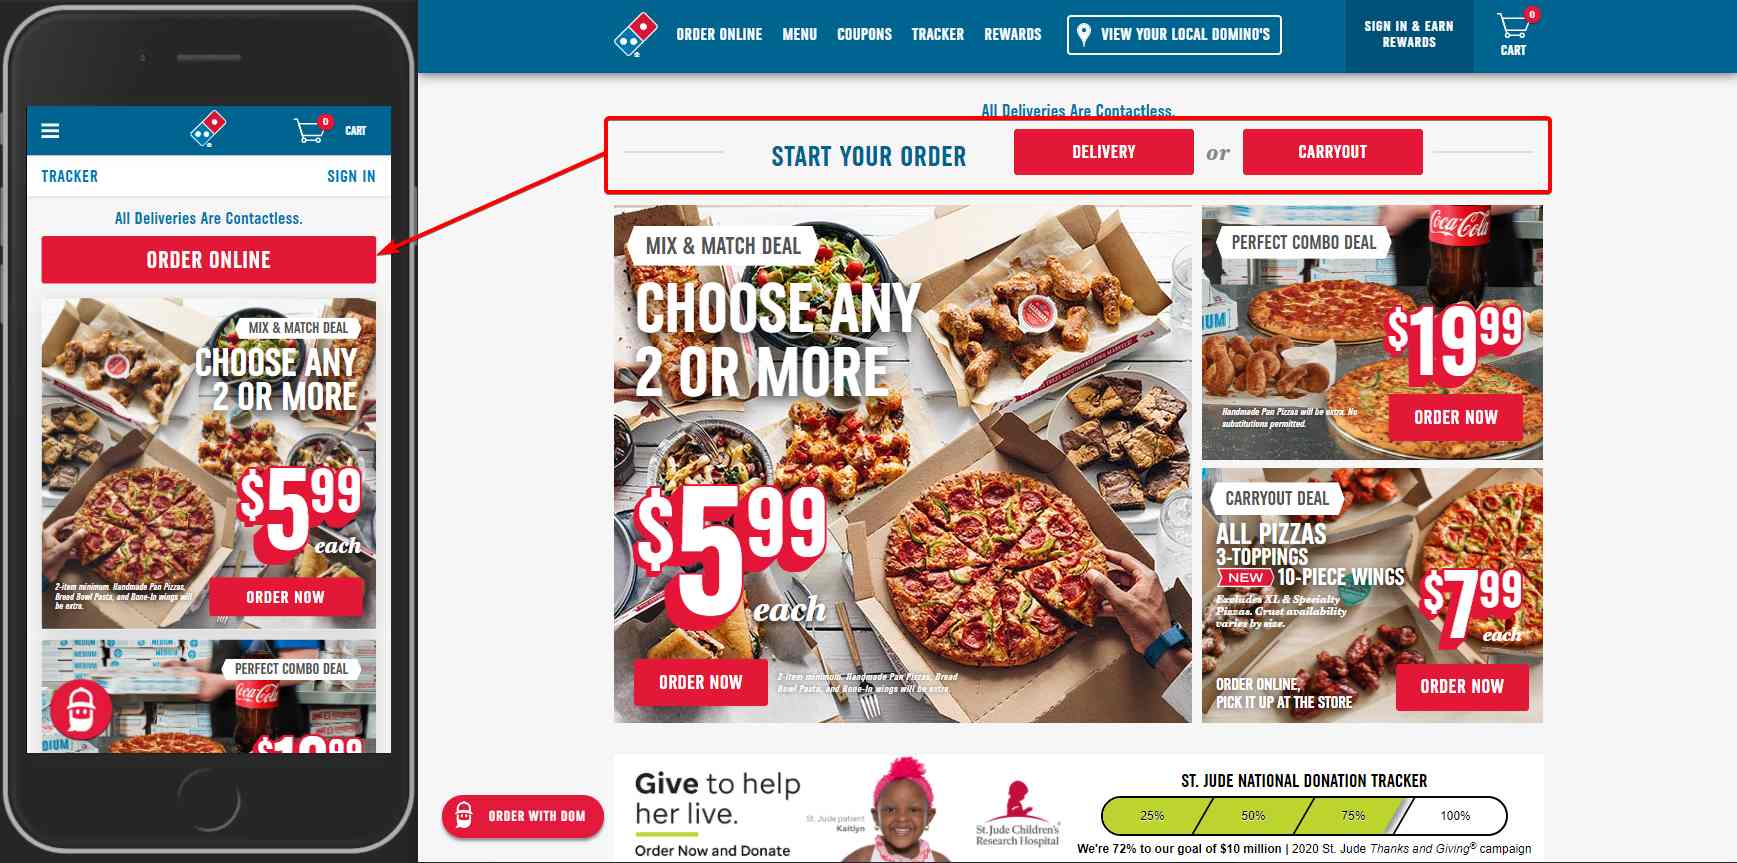 Domino's optimized its CTA on mobile to be more appealing.